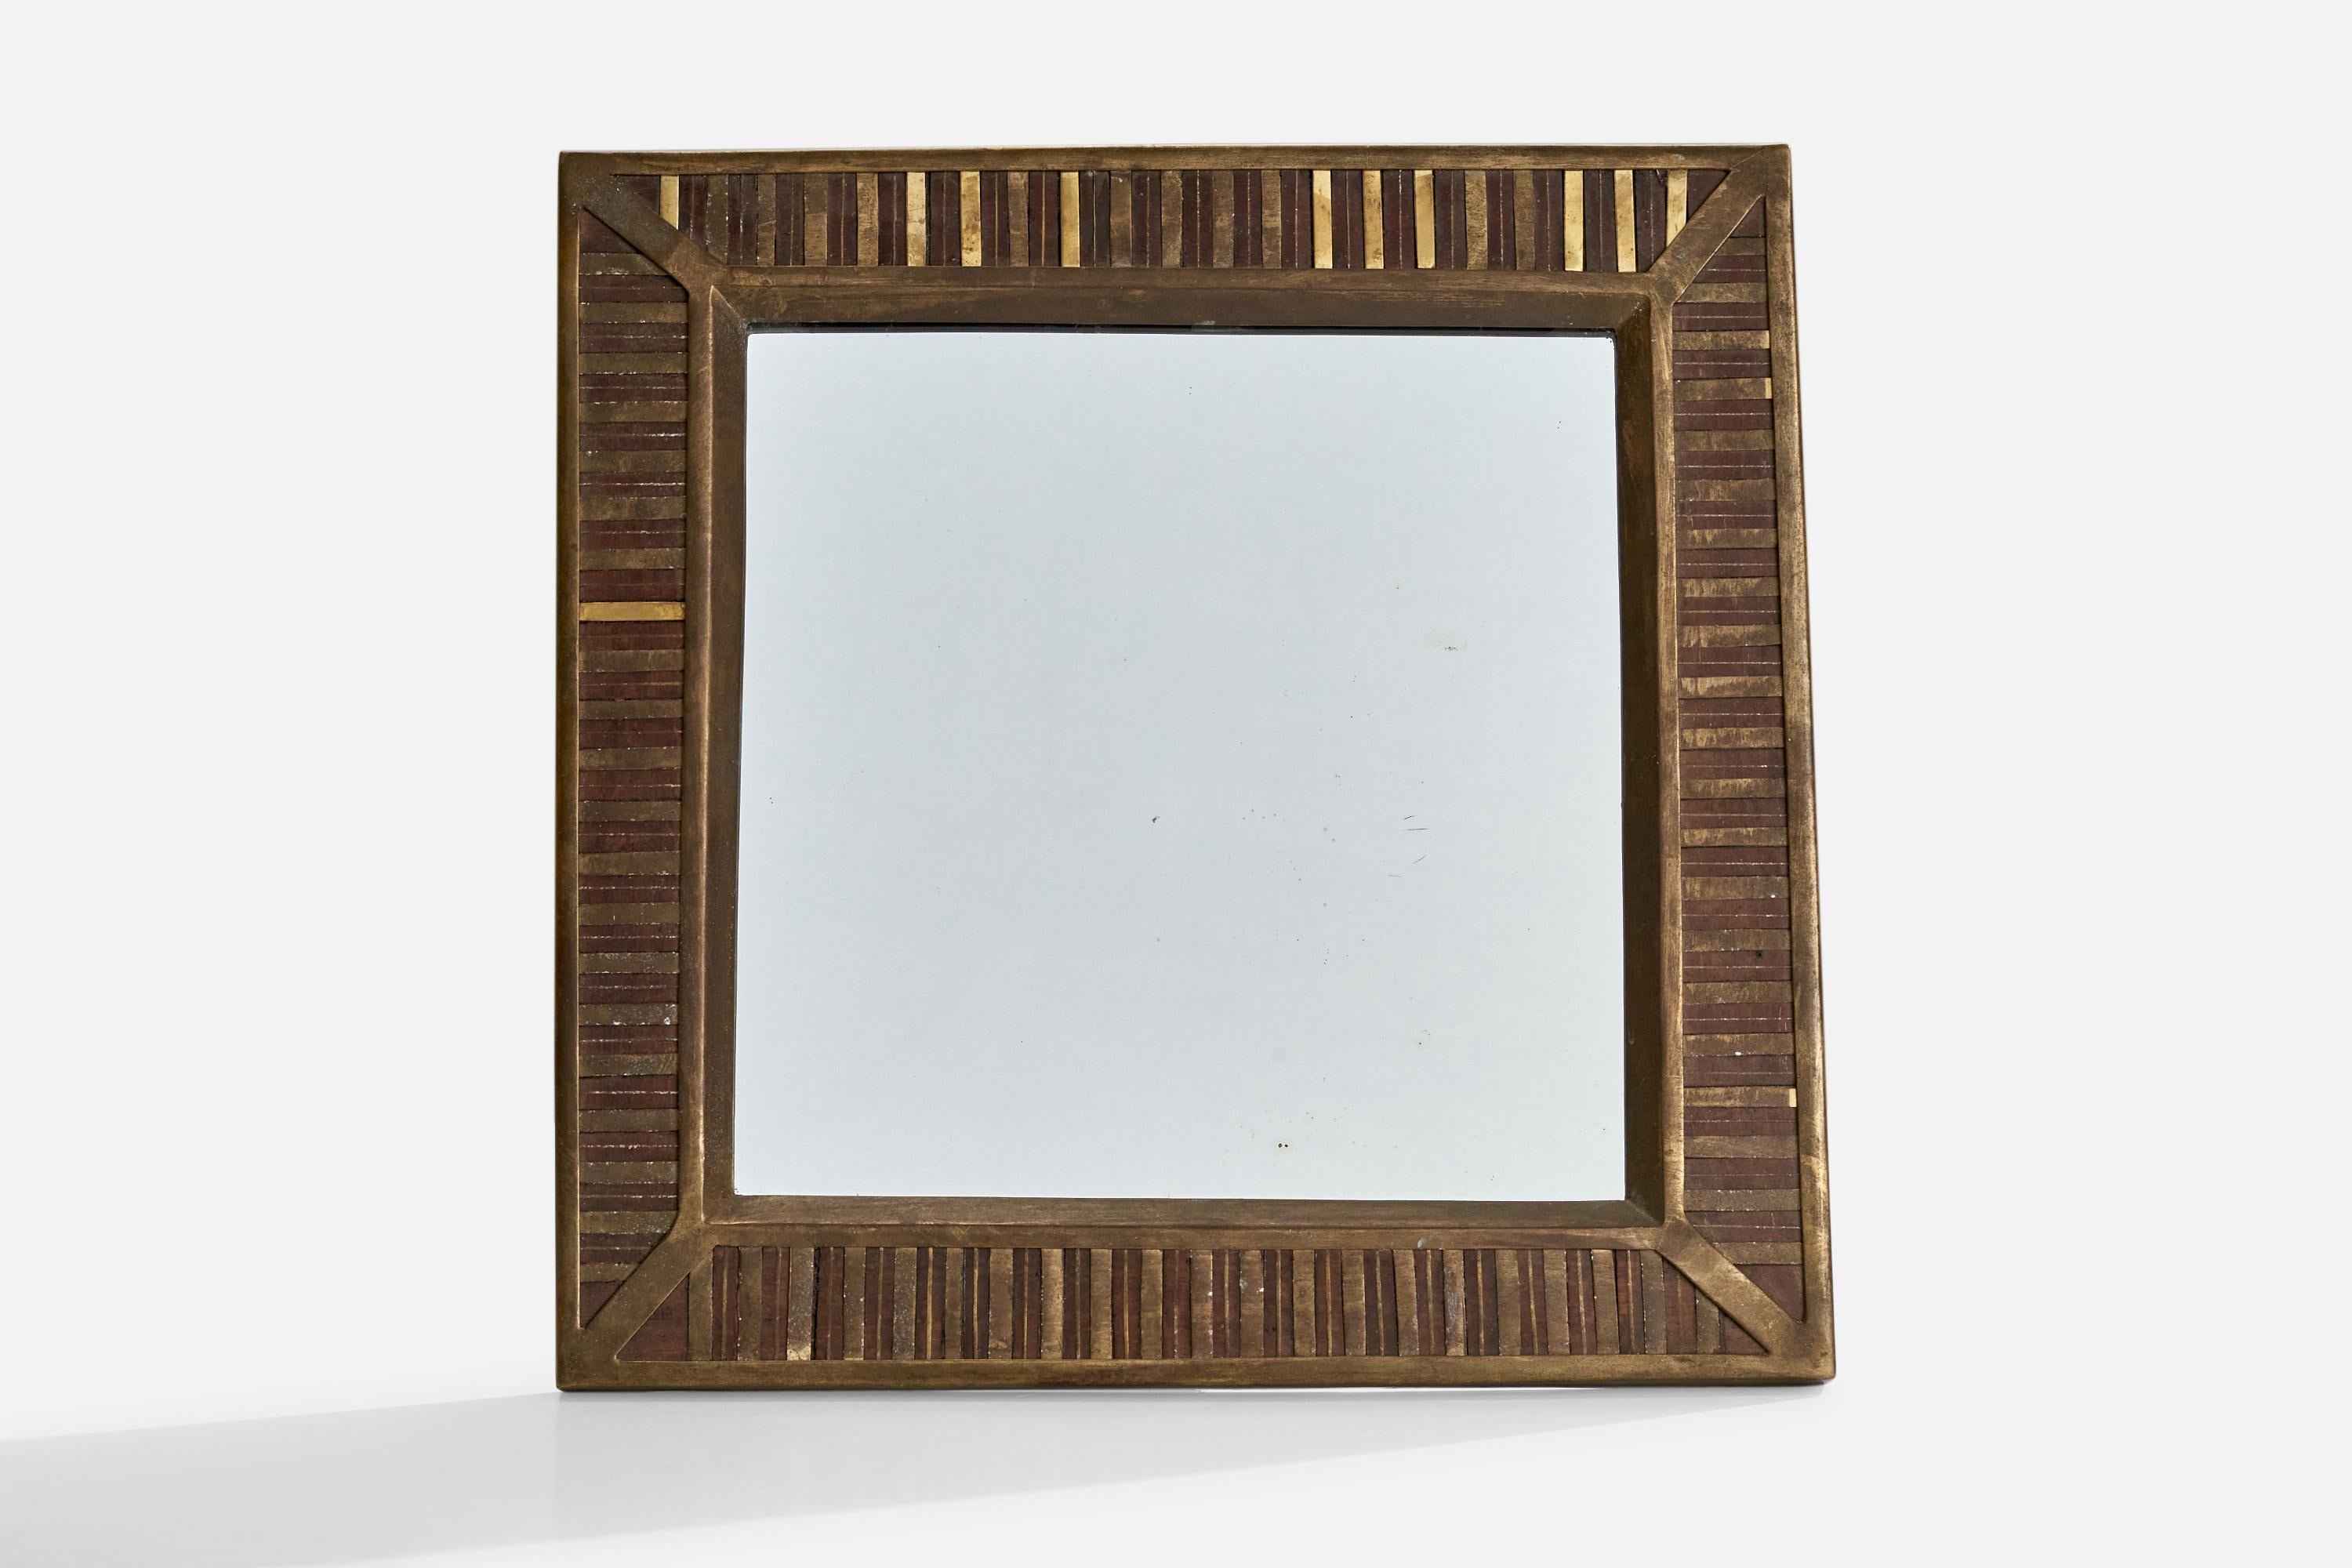 A brass table mirror designed and produced in Italy, 1930s.